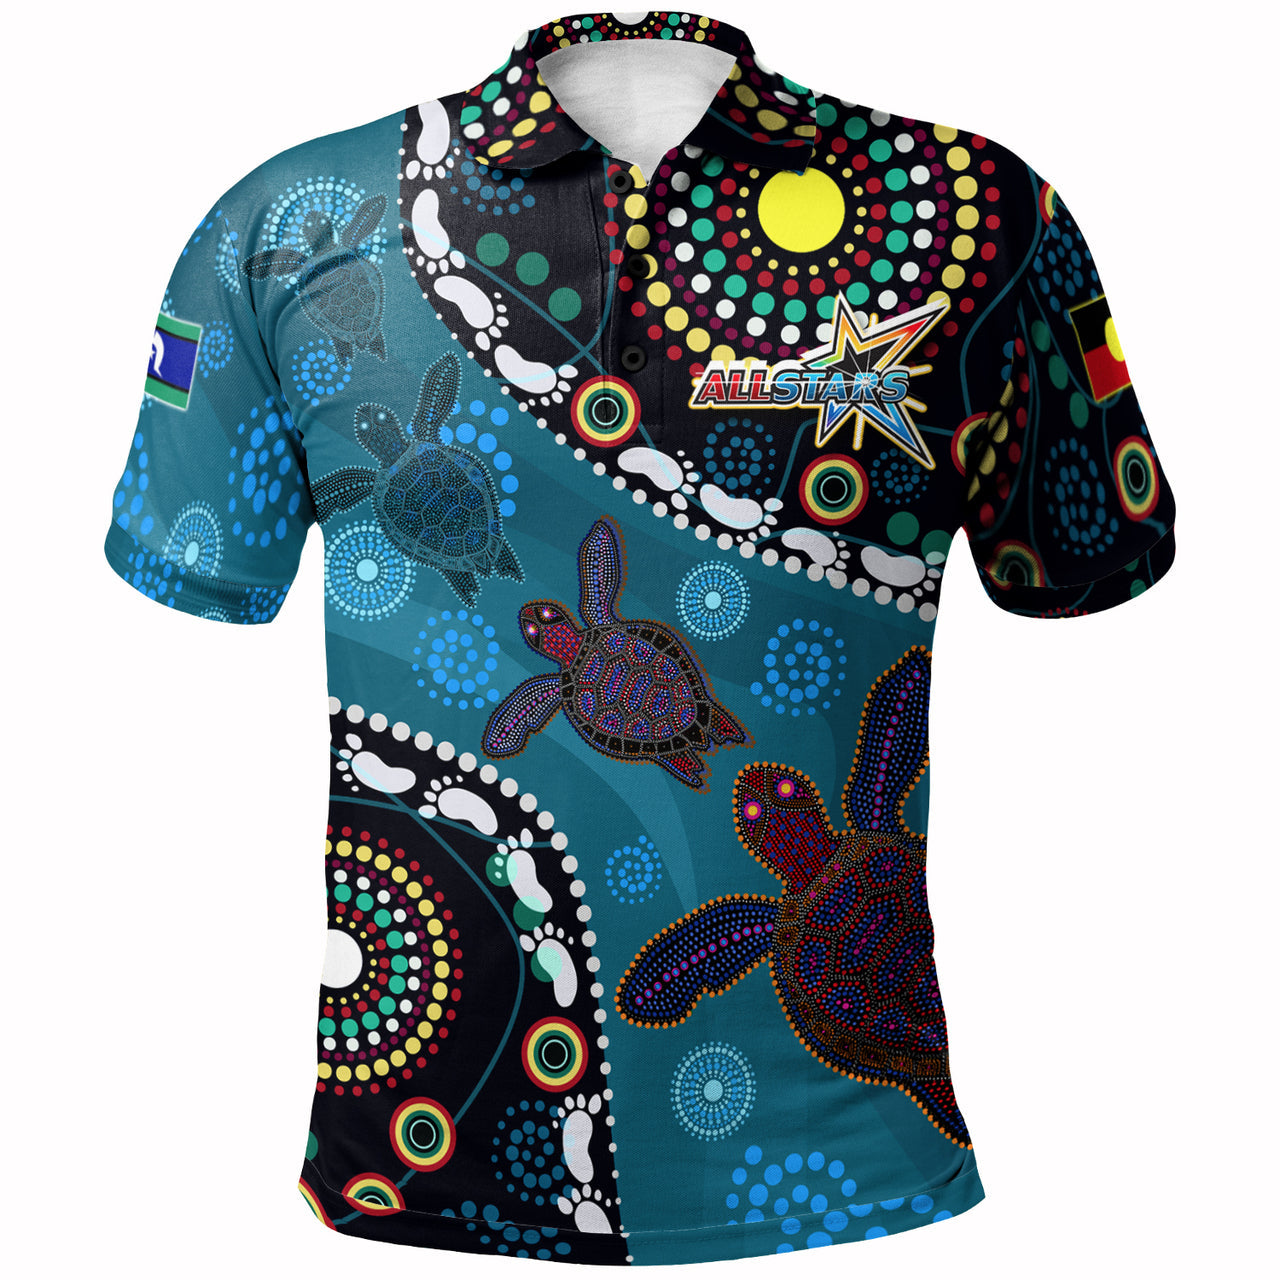 indigenous-all-stars-rugby-custom-polo-shirt-dreamtime-turtle-with-aboriginal-and-torres-strait-islanders-flag-rlt13